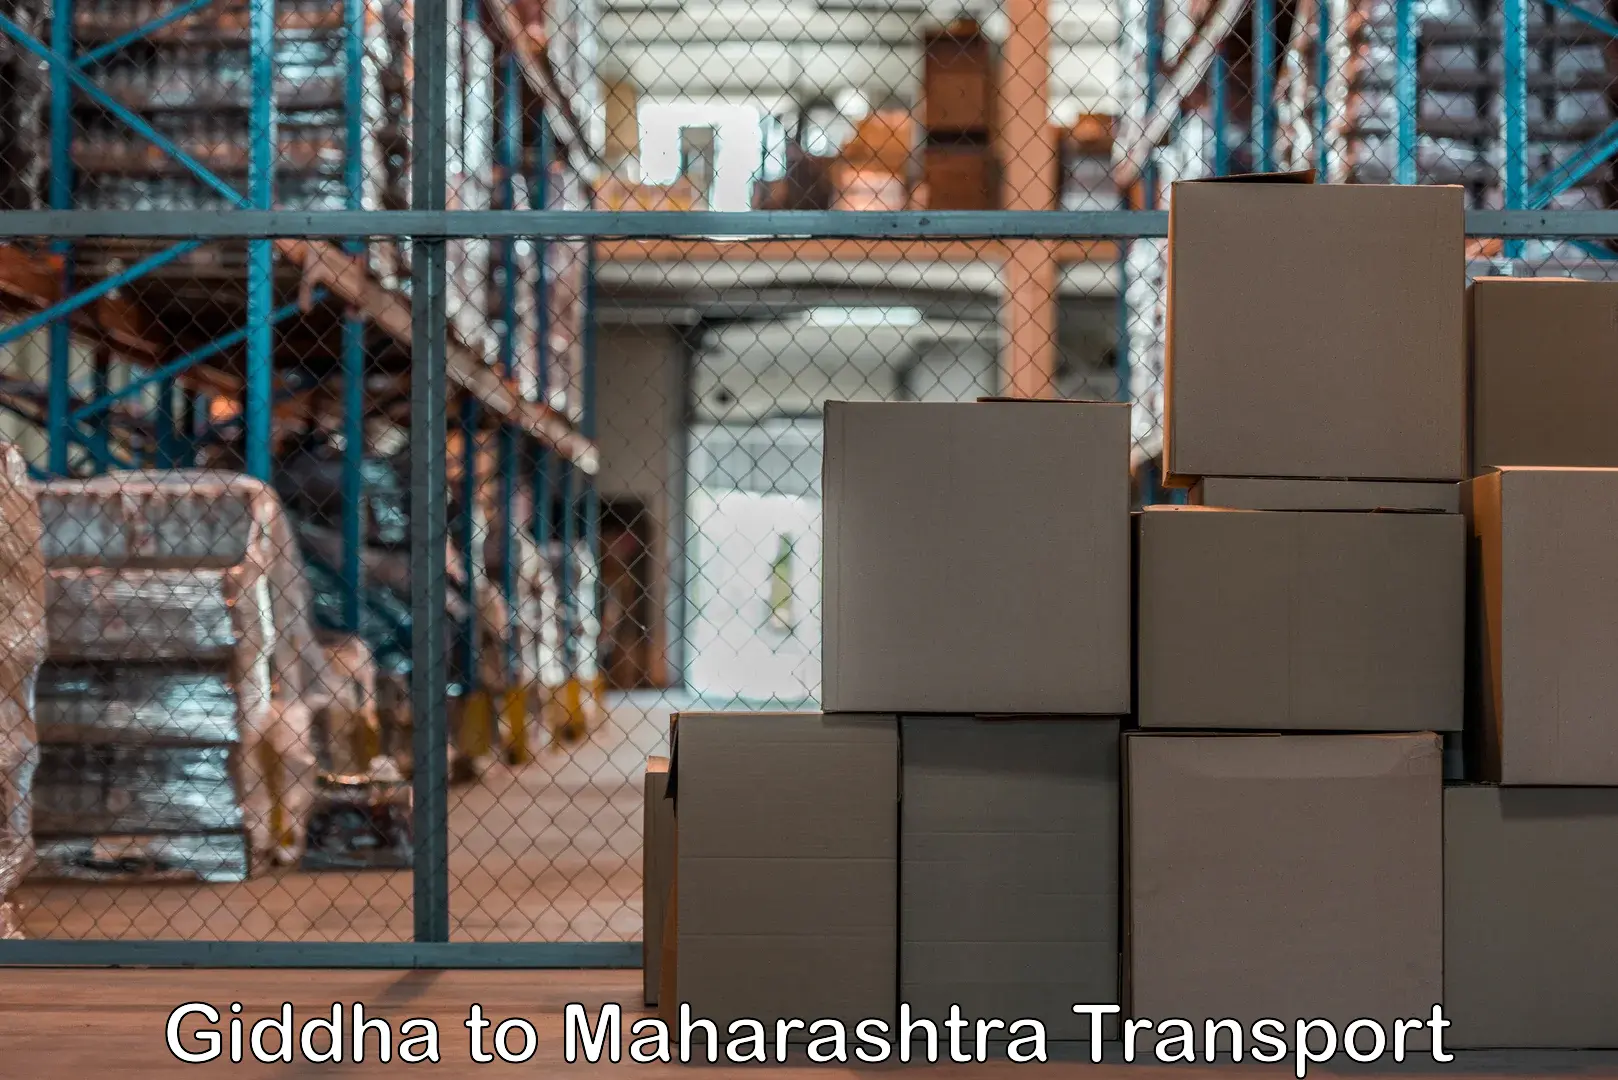 Road transport online services Giddha to Osmanabad